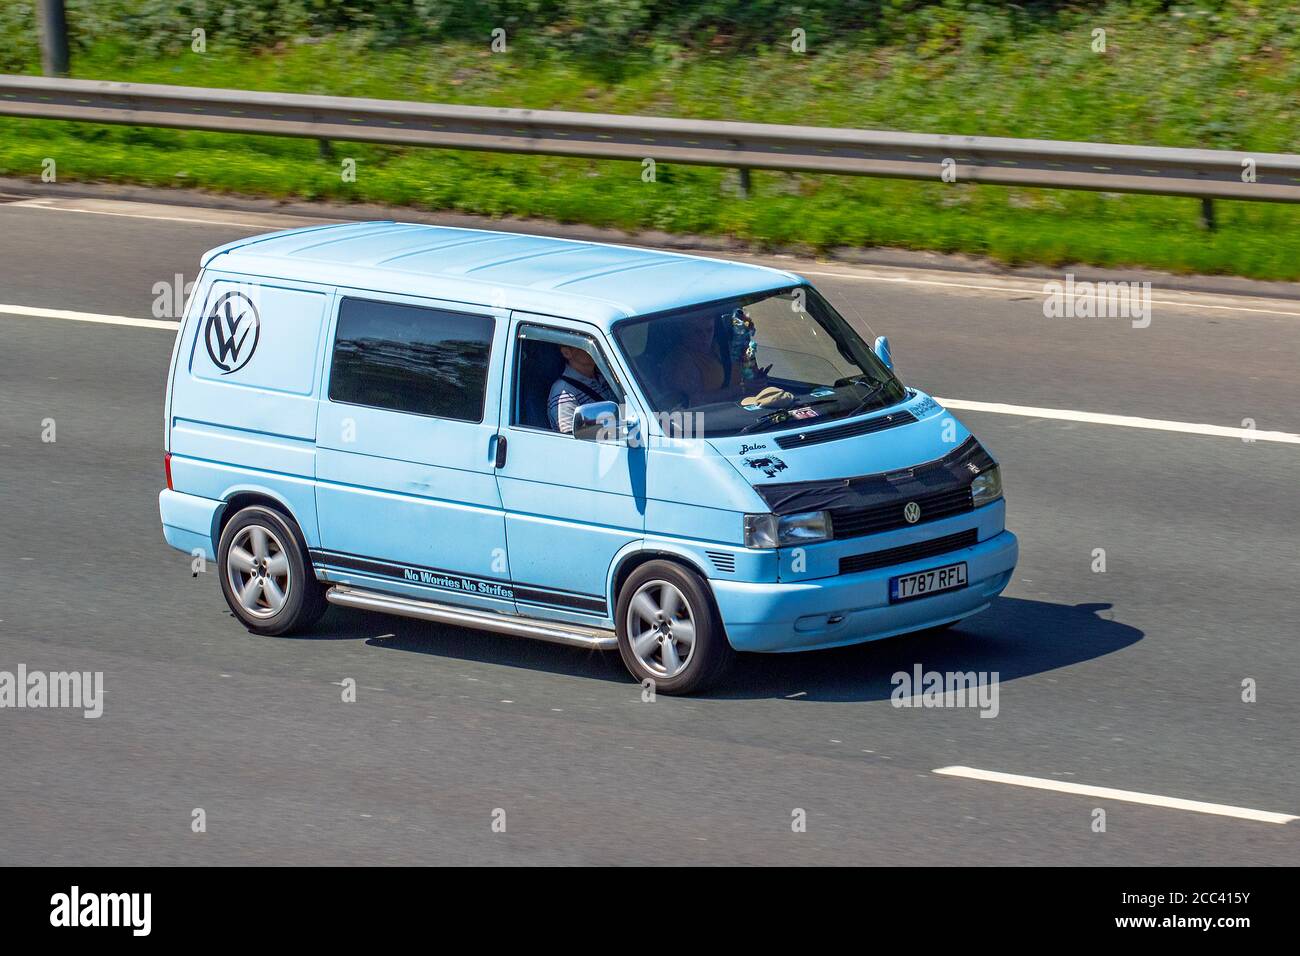 1999 blue VW Volkswagen 800 Special TD SWB; Vehicular traffic moving vehicles, cars driving vehicle on UK roads, motors, motoring on the M6 motorway highway network. Stock Photo